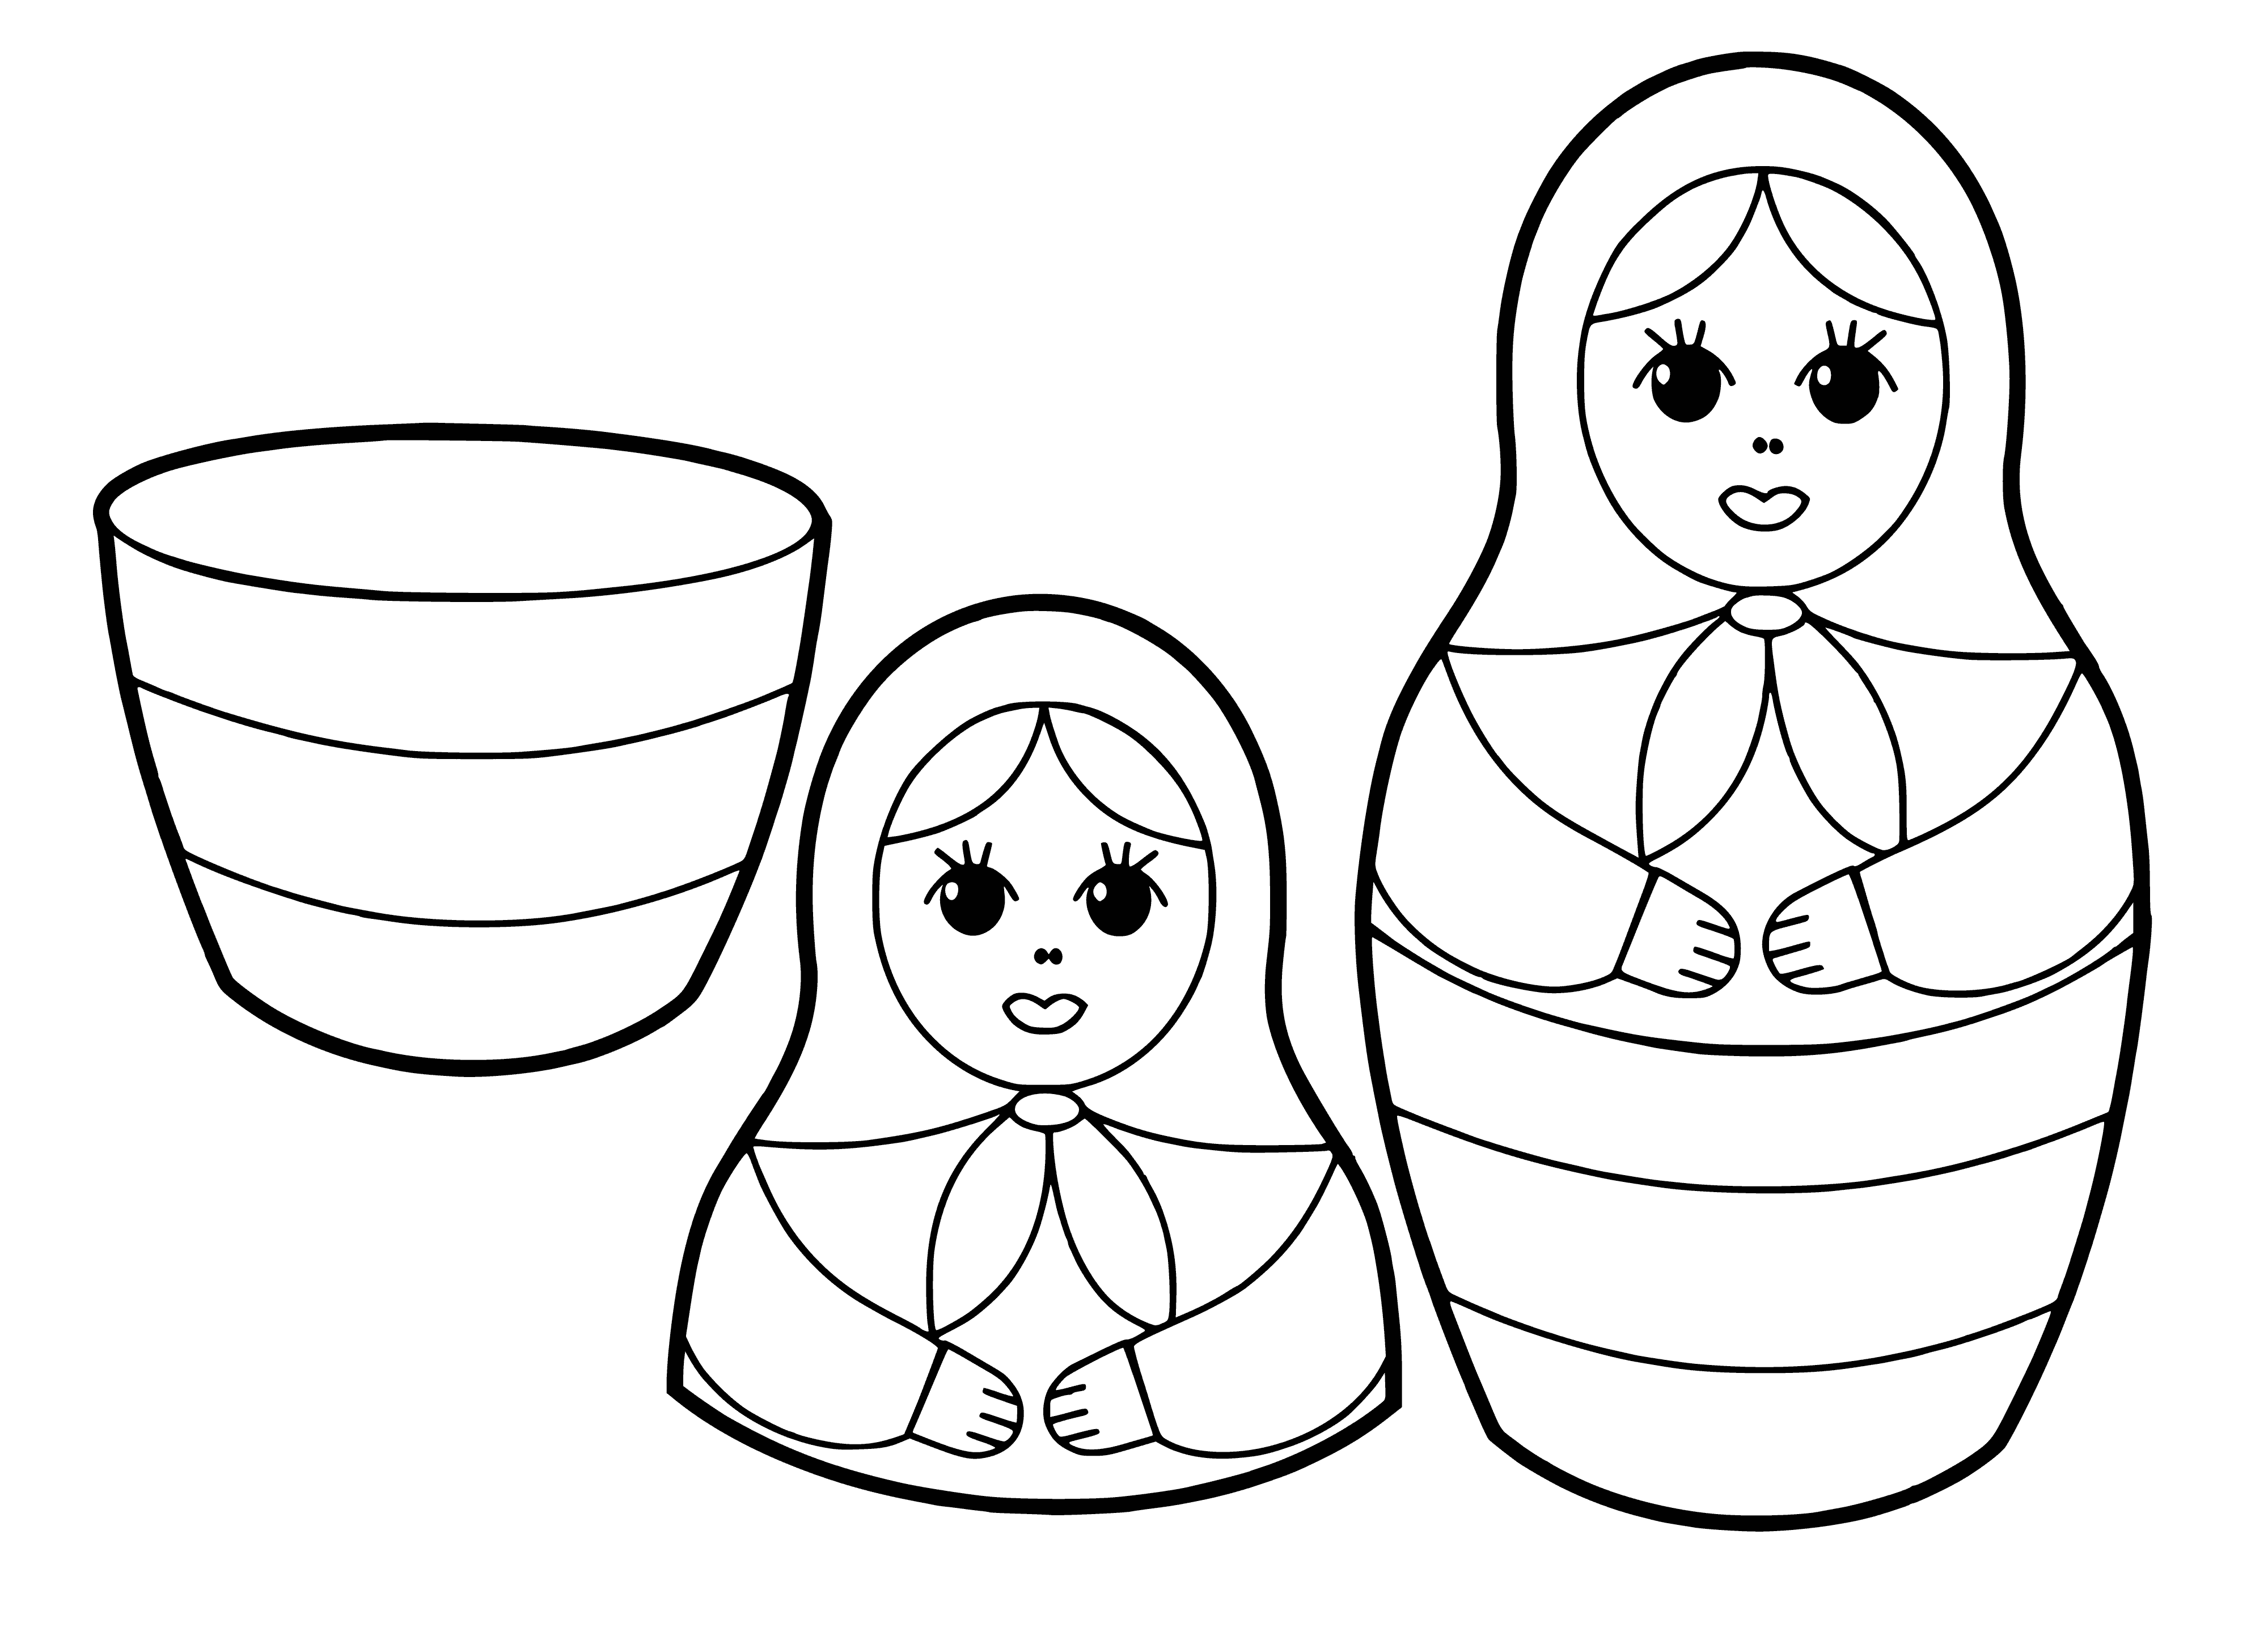 coloring page: Traditional Russian nesting doll, wood doll containing smaller dolls inside, opening to reveal smaller dolls inside each. #Russia